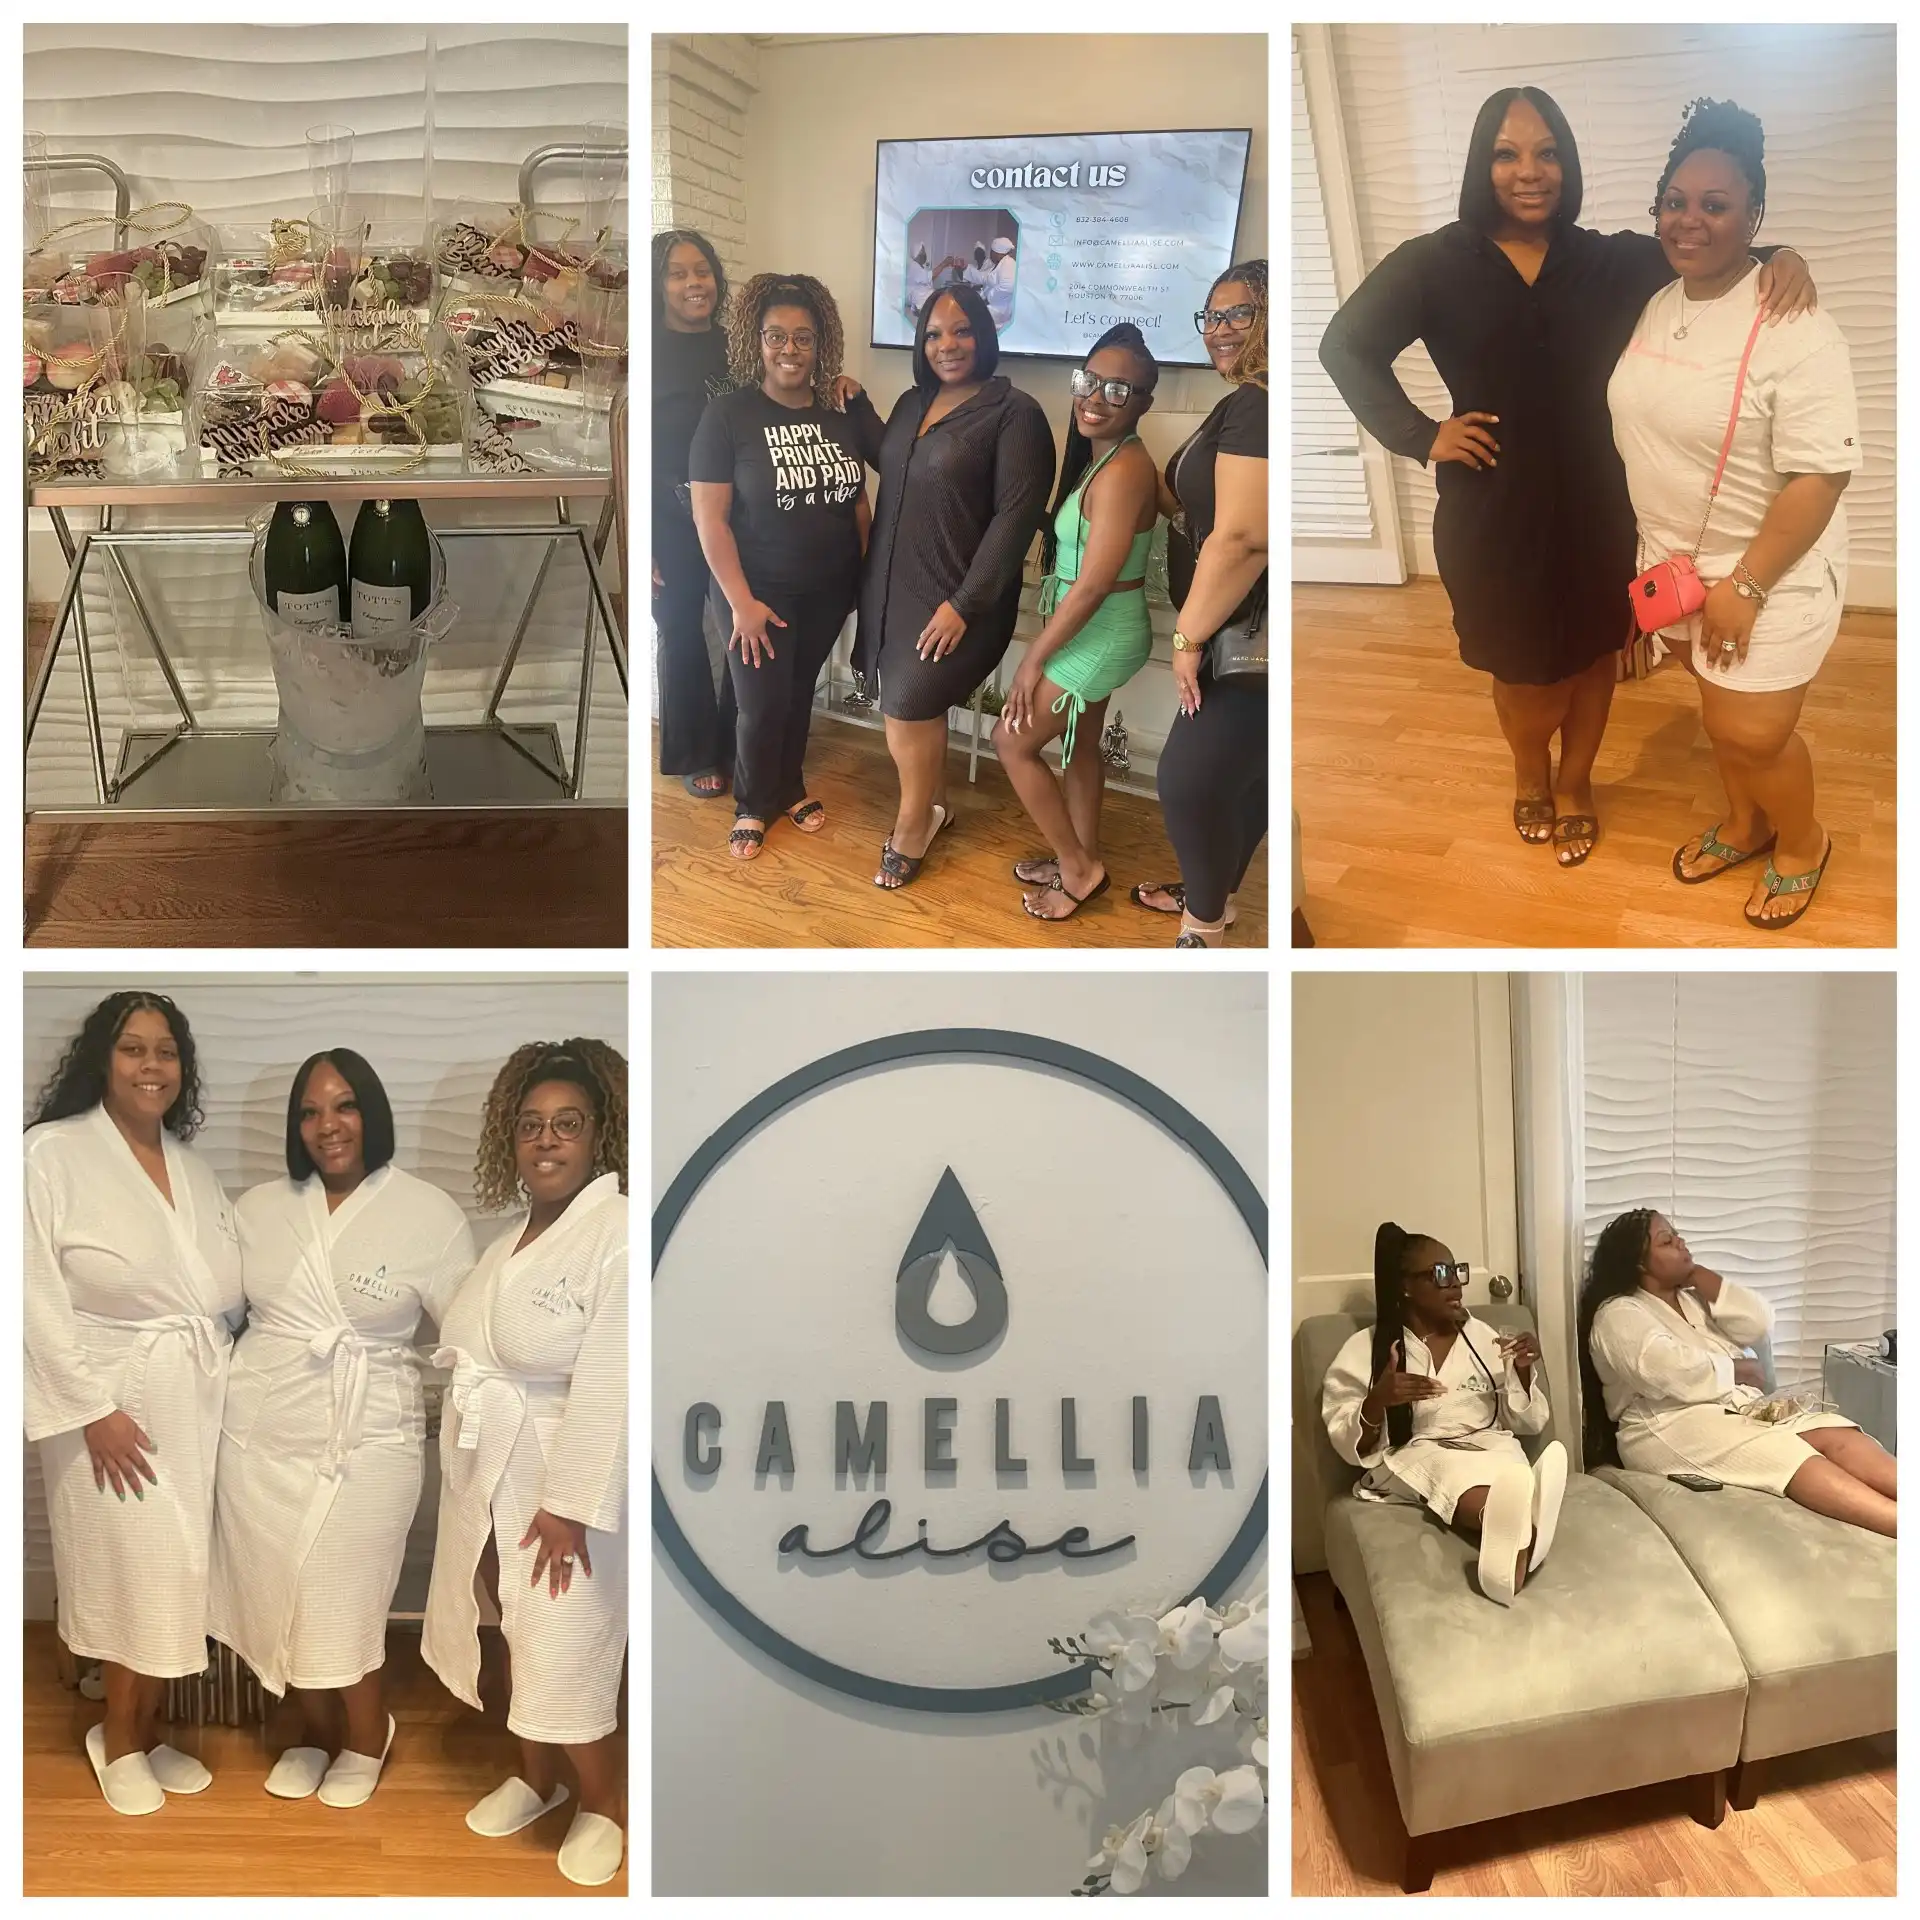 Well Known Boutique Owner Treated 5 Women Business Owners to a Spa Day in Honor of Women's History Month